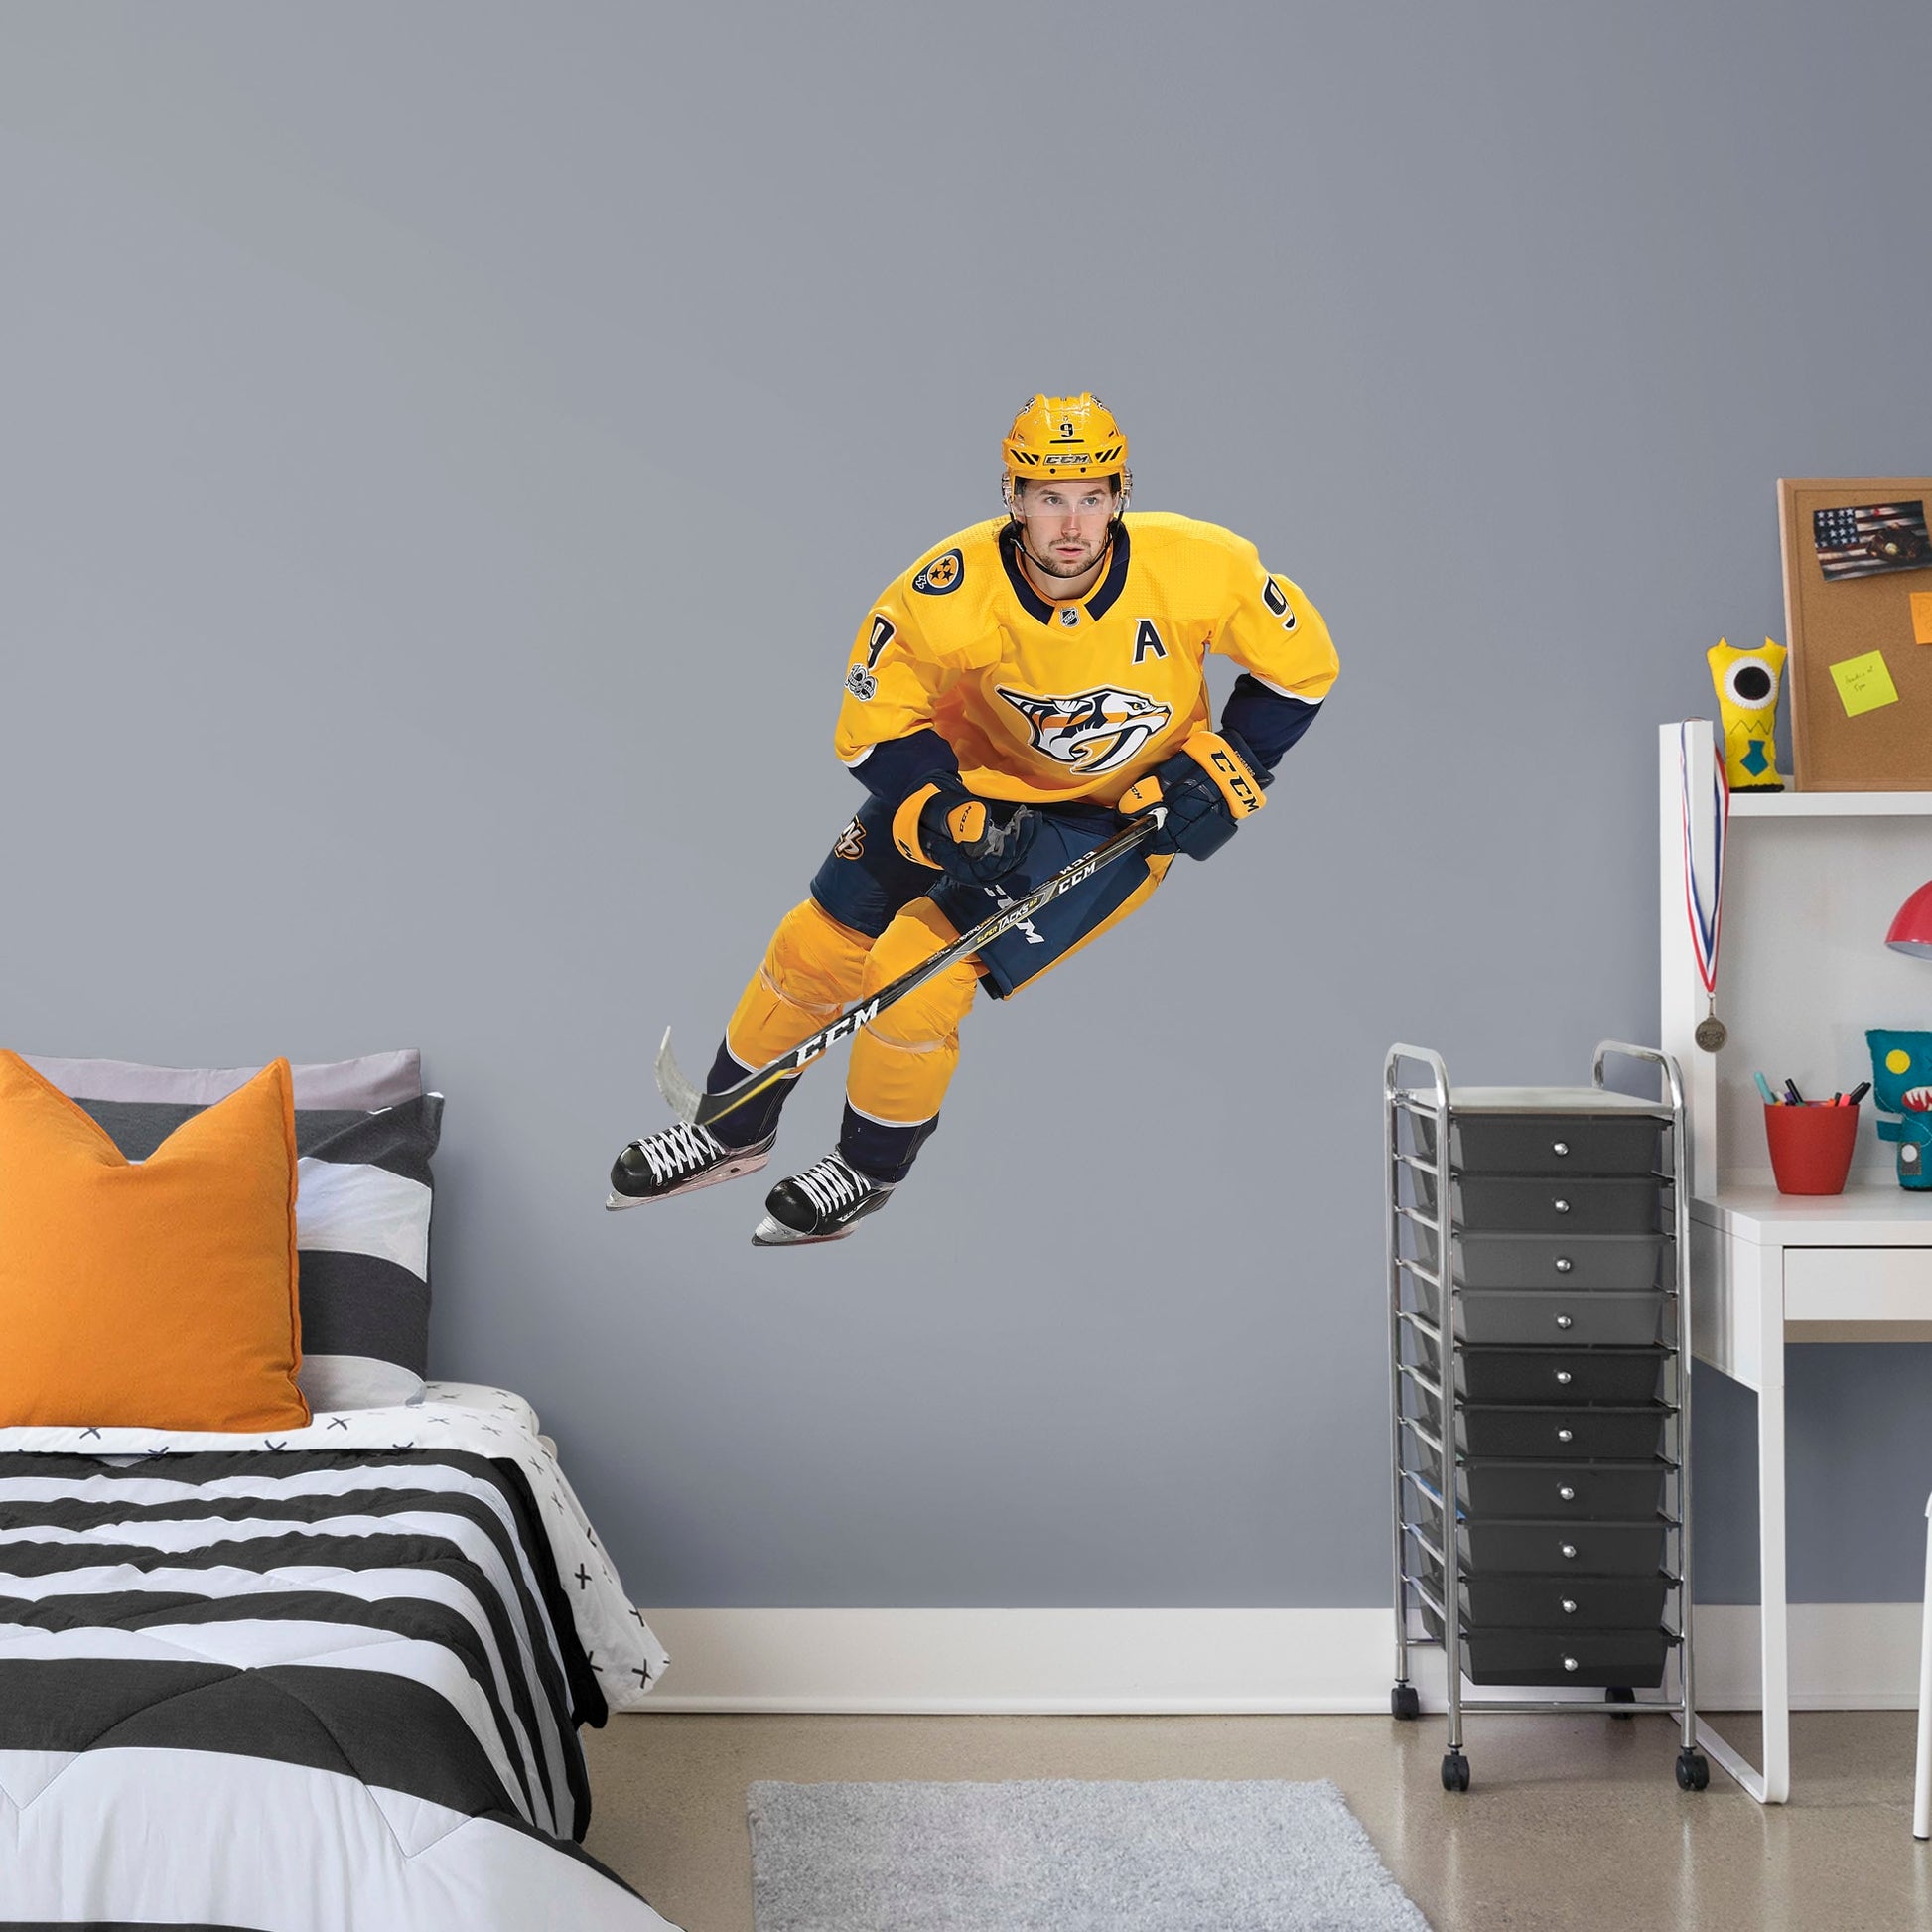 Giant Athlete + 2 Decals (43"W x 48"H) Filip Forsberg has been a force in the NHL since he was first drafted in 2012 and now you can bring him to life in your home with this Officially Licensed NHL Removable Wall Decal! Pictured here in action on the ice, this durable and reusable wall decal is sure to standout in your bedroom, office, or fan room!